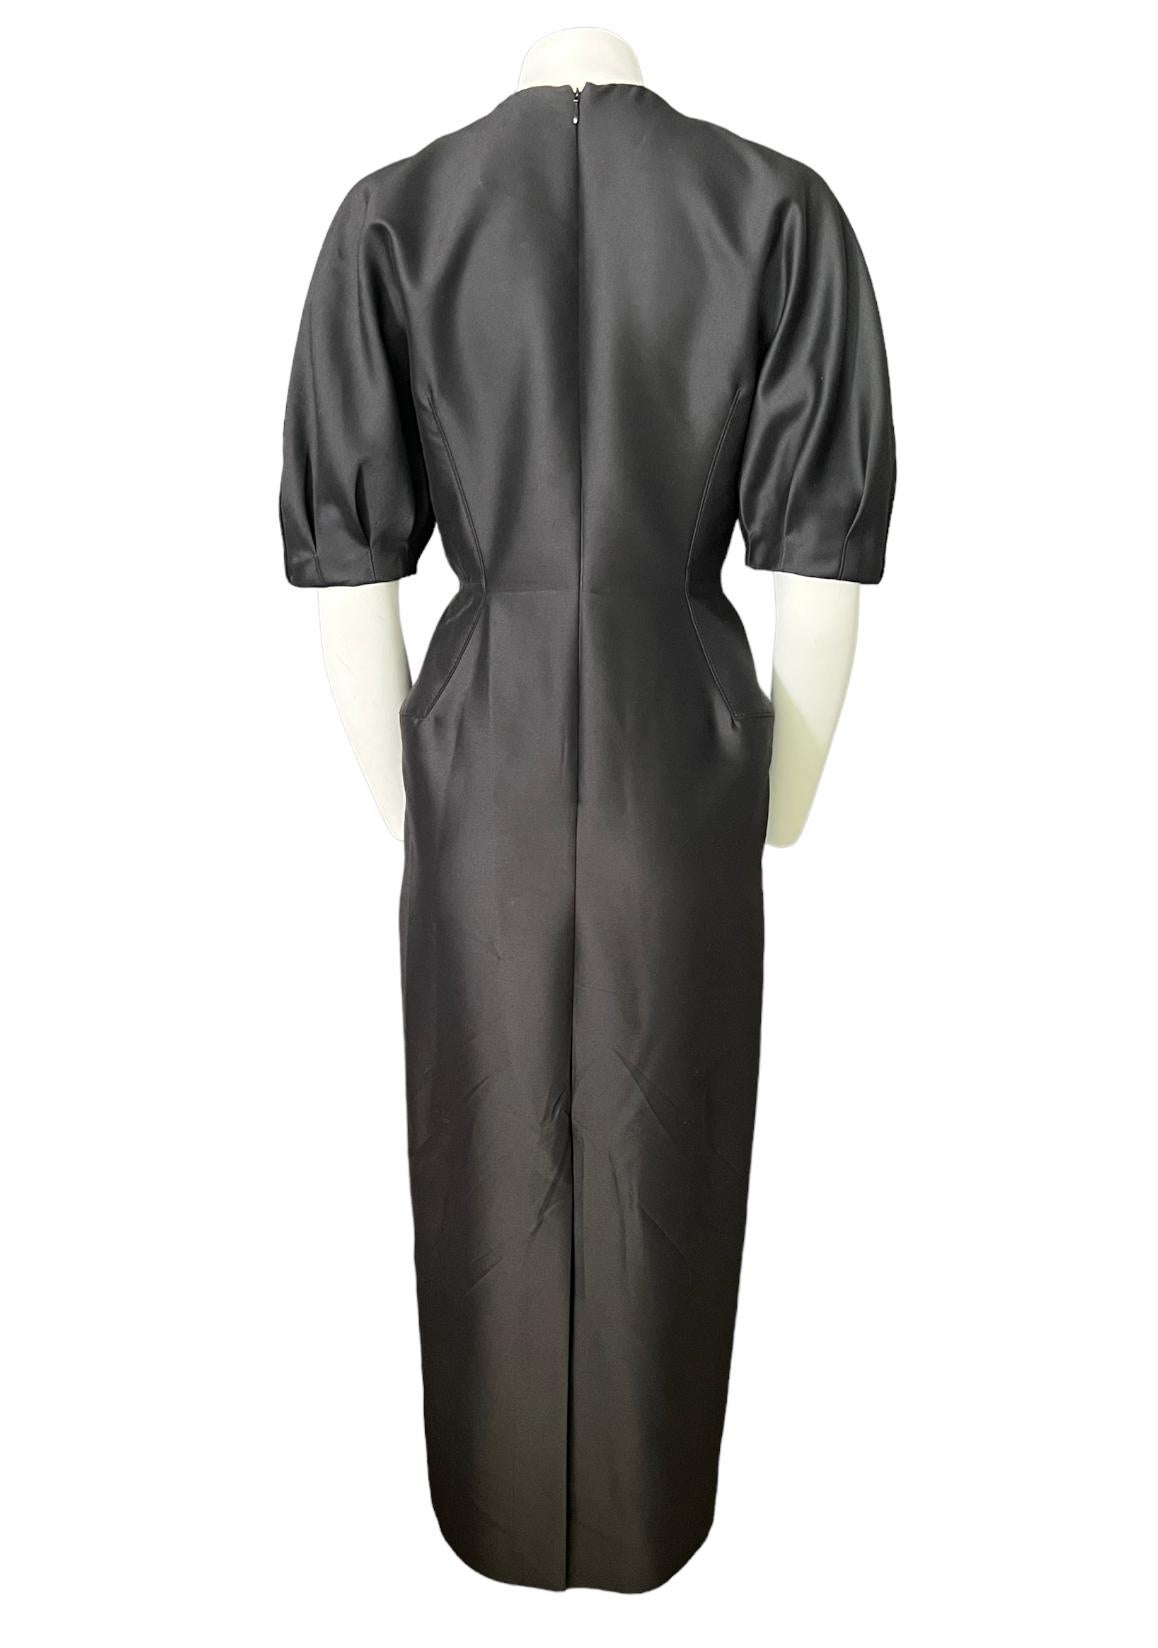 Gabriela Hearts Black Midi Dress, Size 40 In Excellent Condition For Sale In Beverly Hills, CA